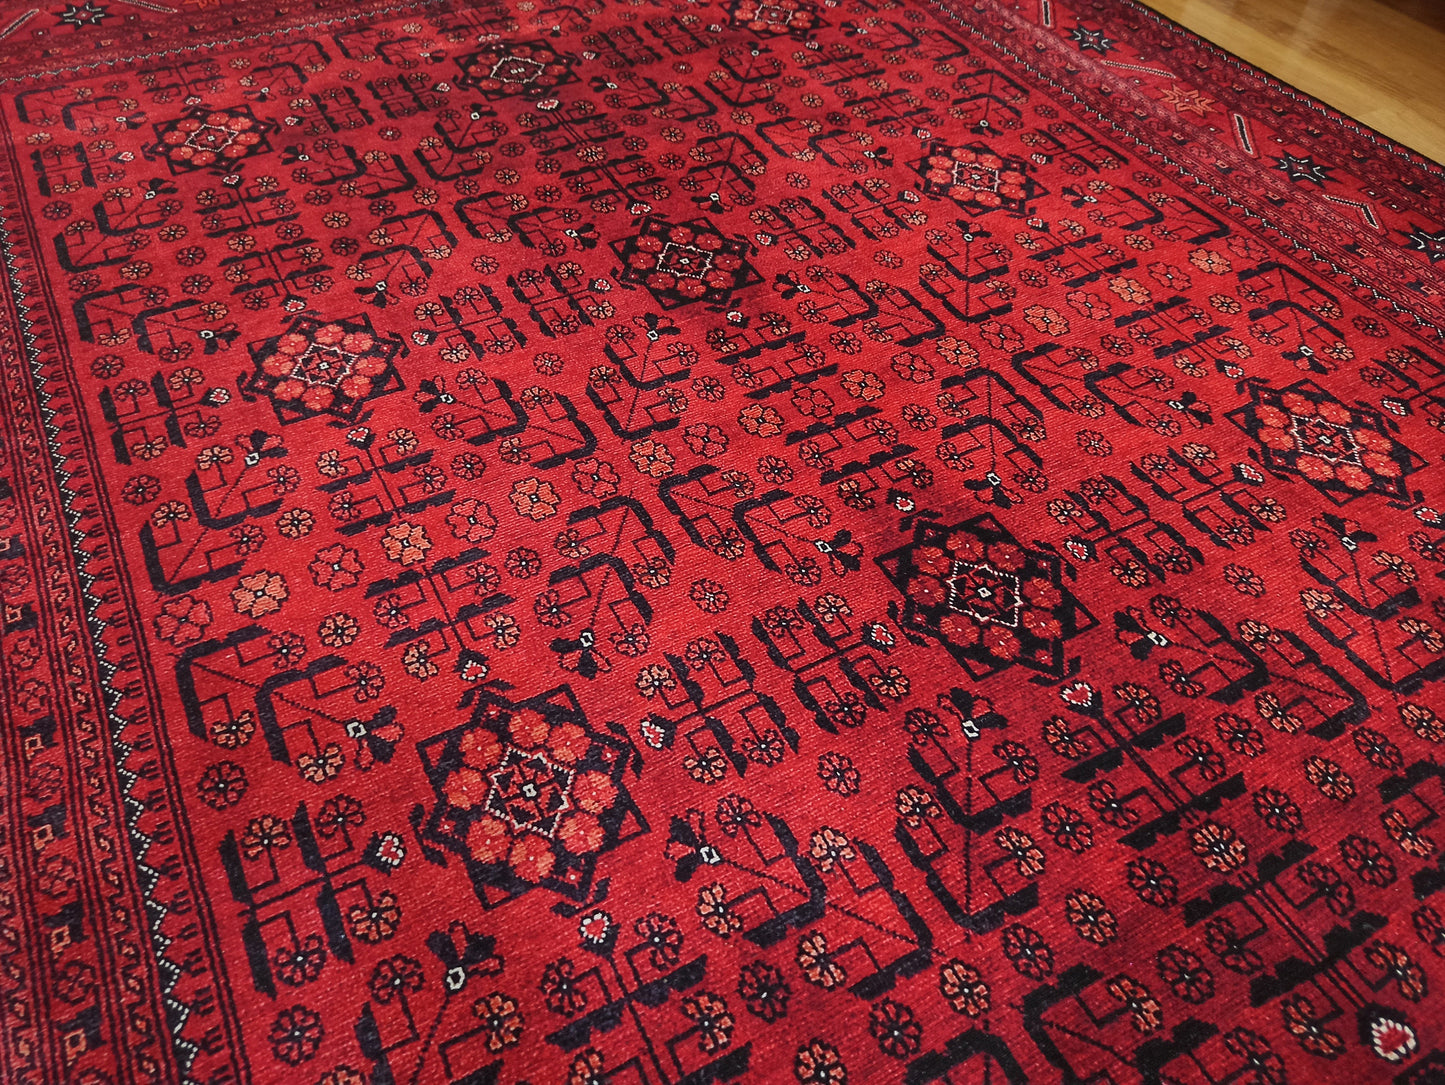 ZANAN | Turkish Rug, Red Vintage Distressed look, Faded Area rug, Bohemian Floral Turkmen style, Mid-century Modern Home decor, Fame Rugs